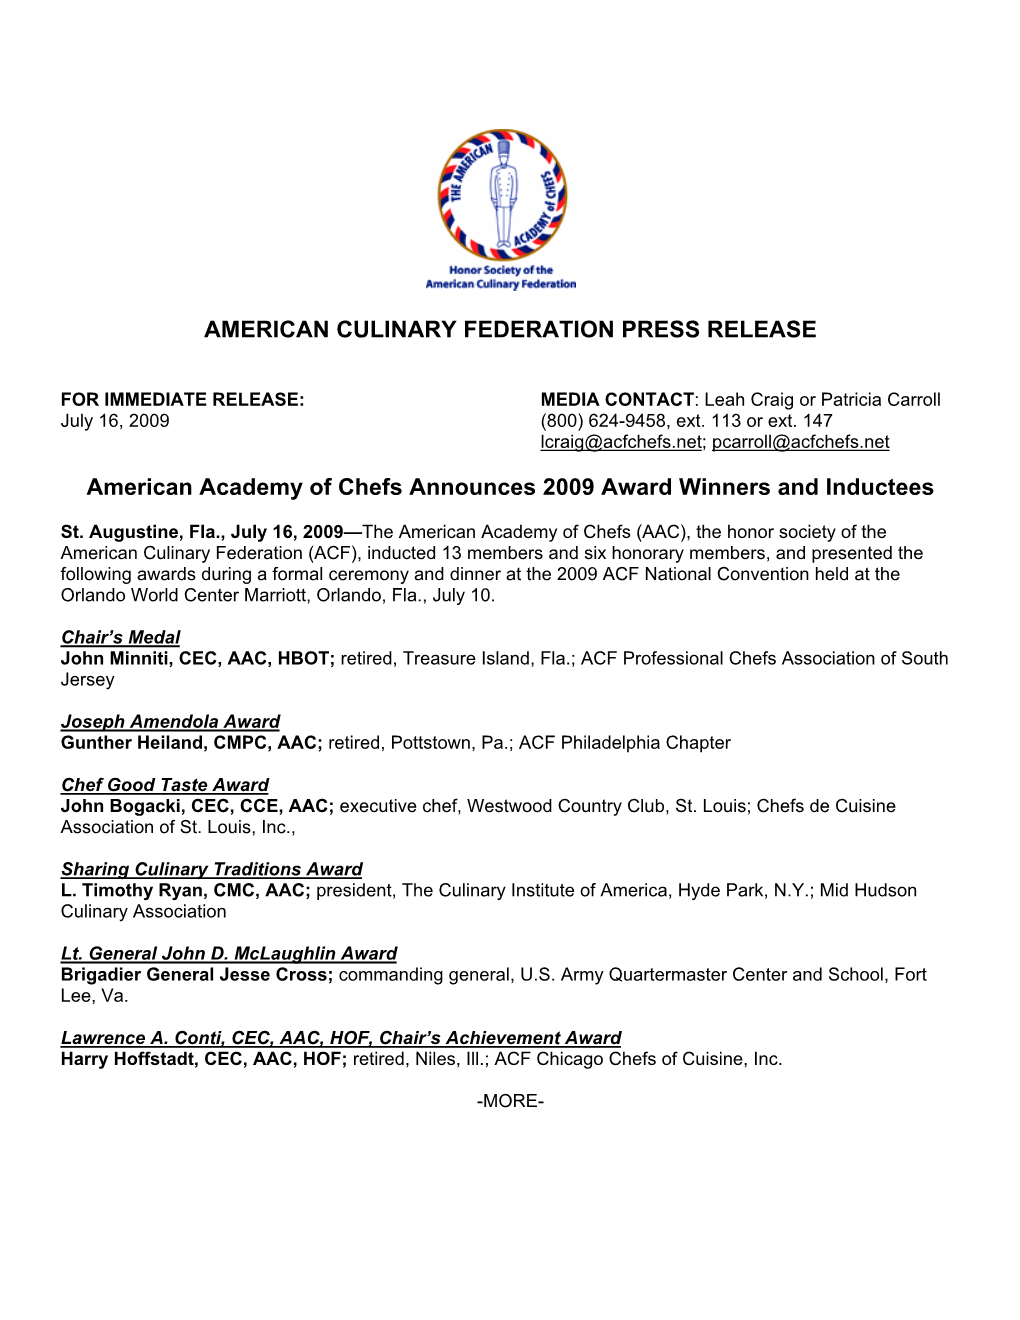 American Academy of Chefs Announces 2009 Award Winners and Inductees